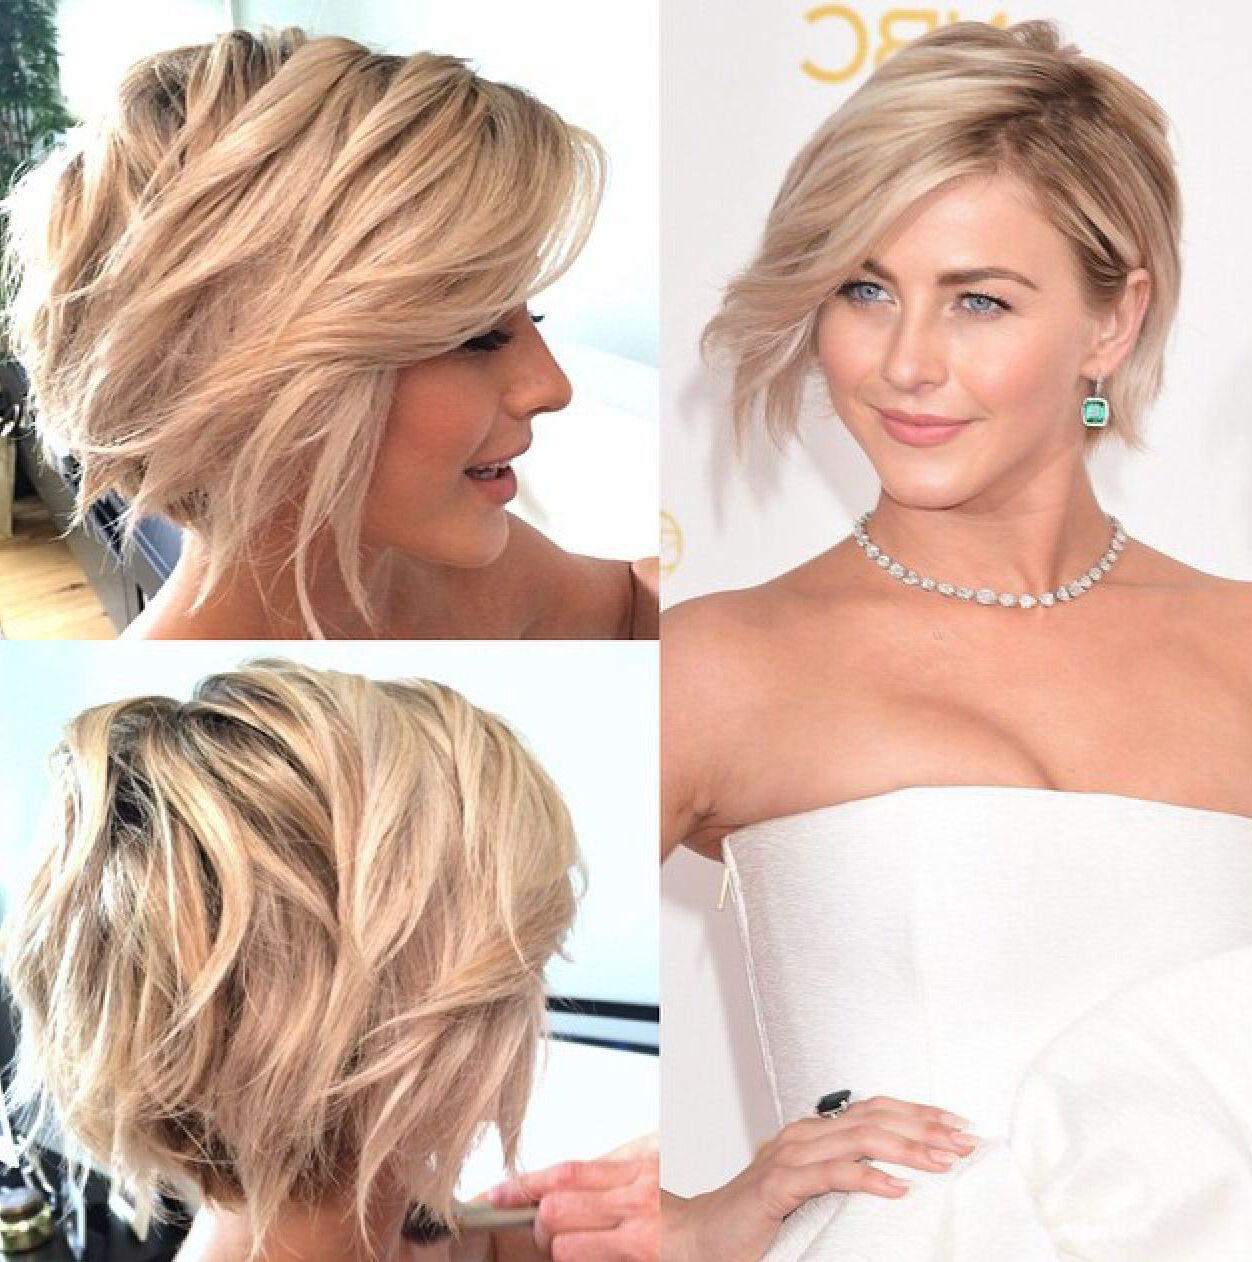 28 Best New Short Layered Bob Hairstyles | Lovely Hairstyles With Regard To Julianne Hough Short Haircuts (View 22 of 25)